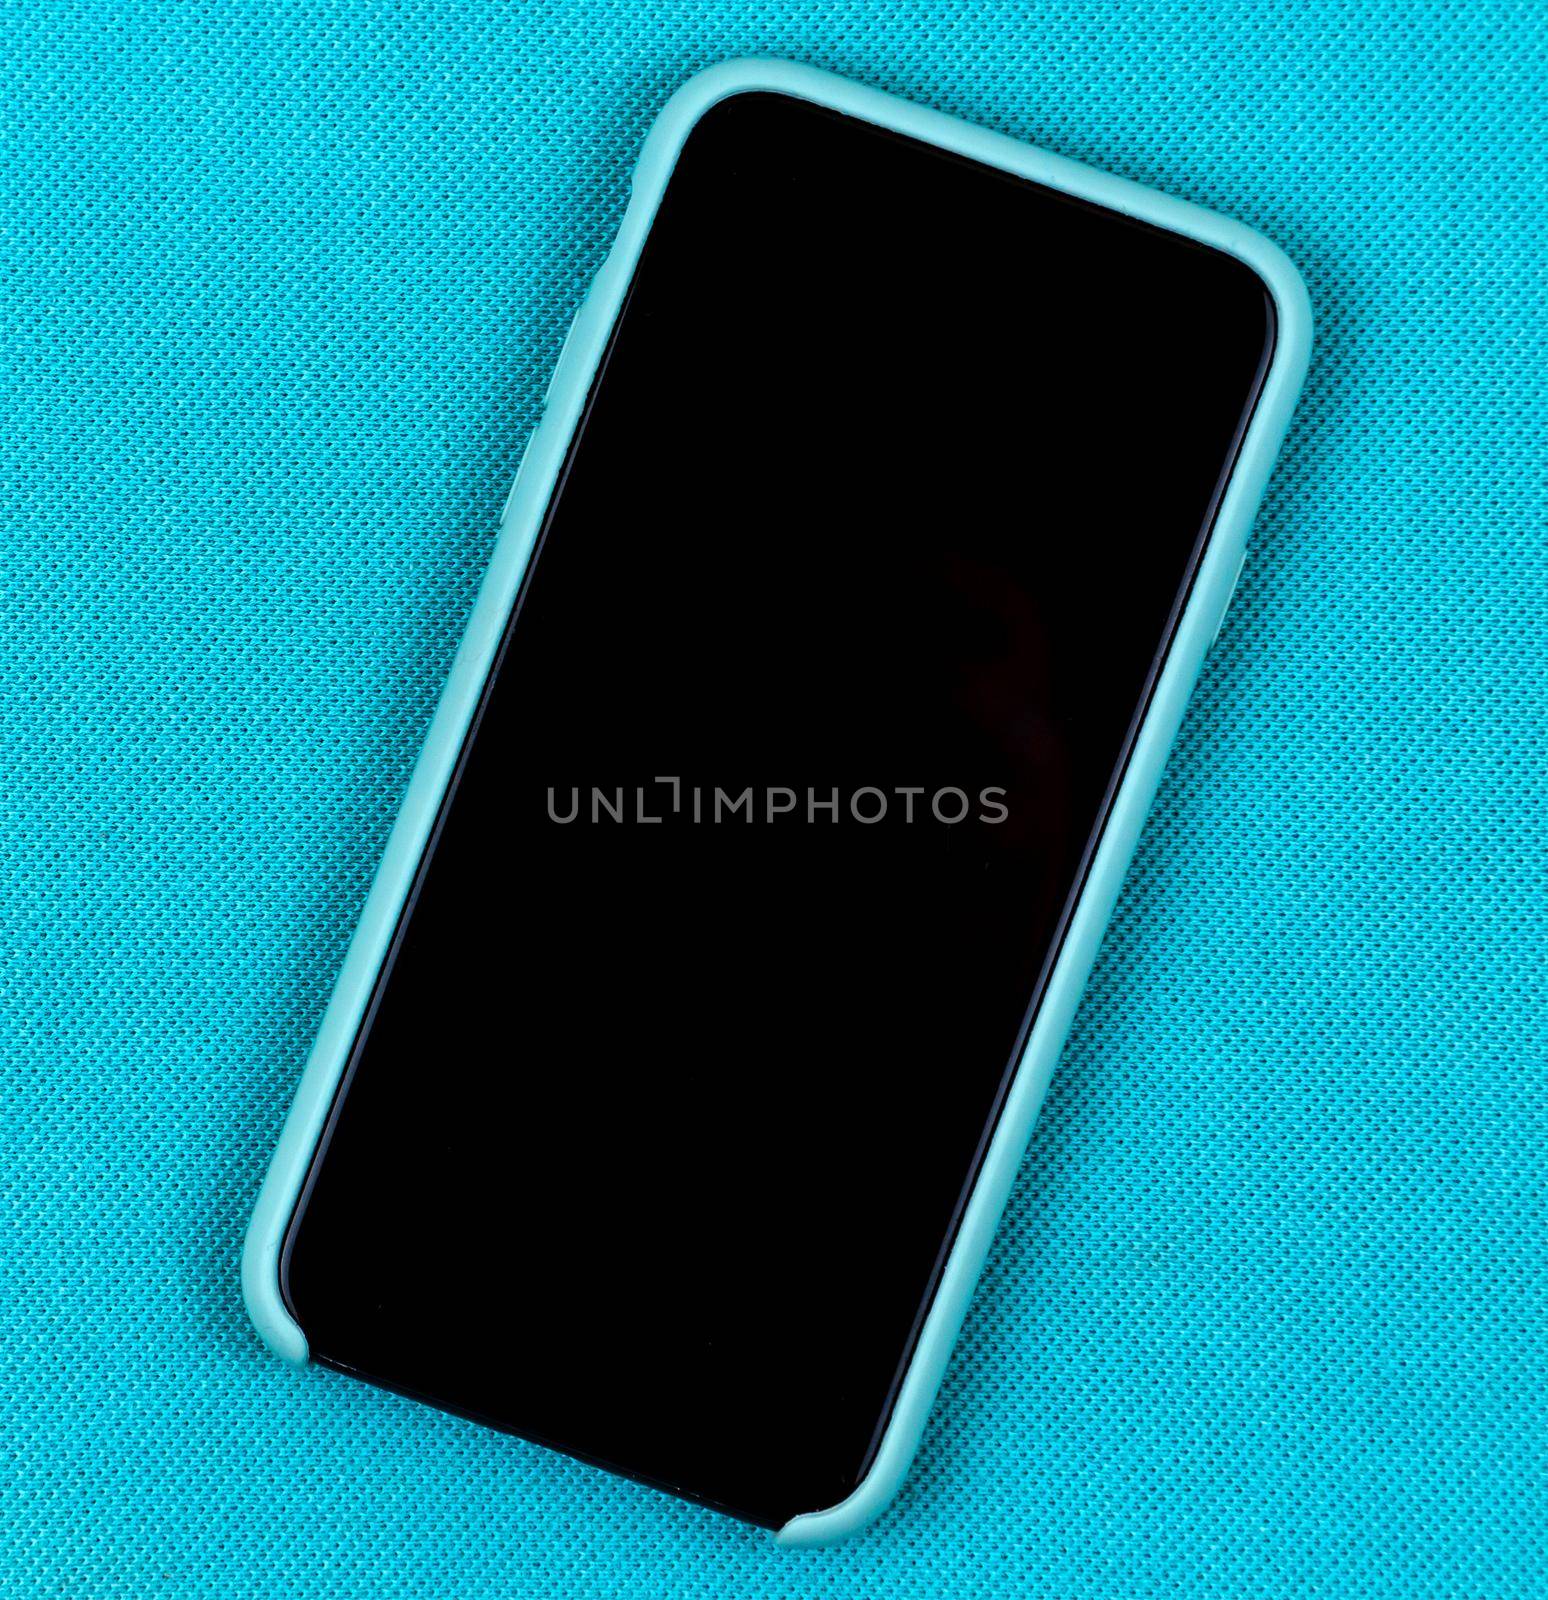 Black Mobile phone or smartphone in aqua blue case on a trendy aqua background with space for text.